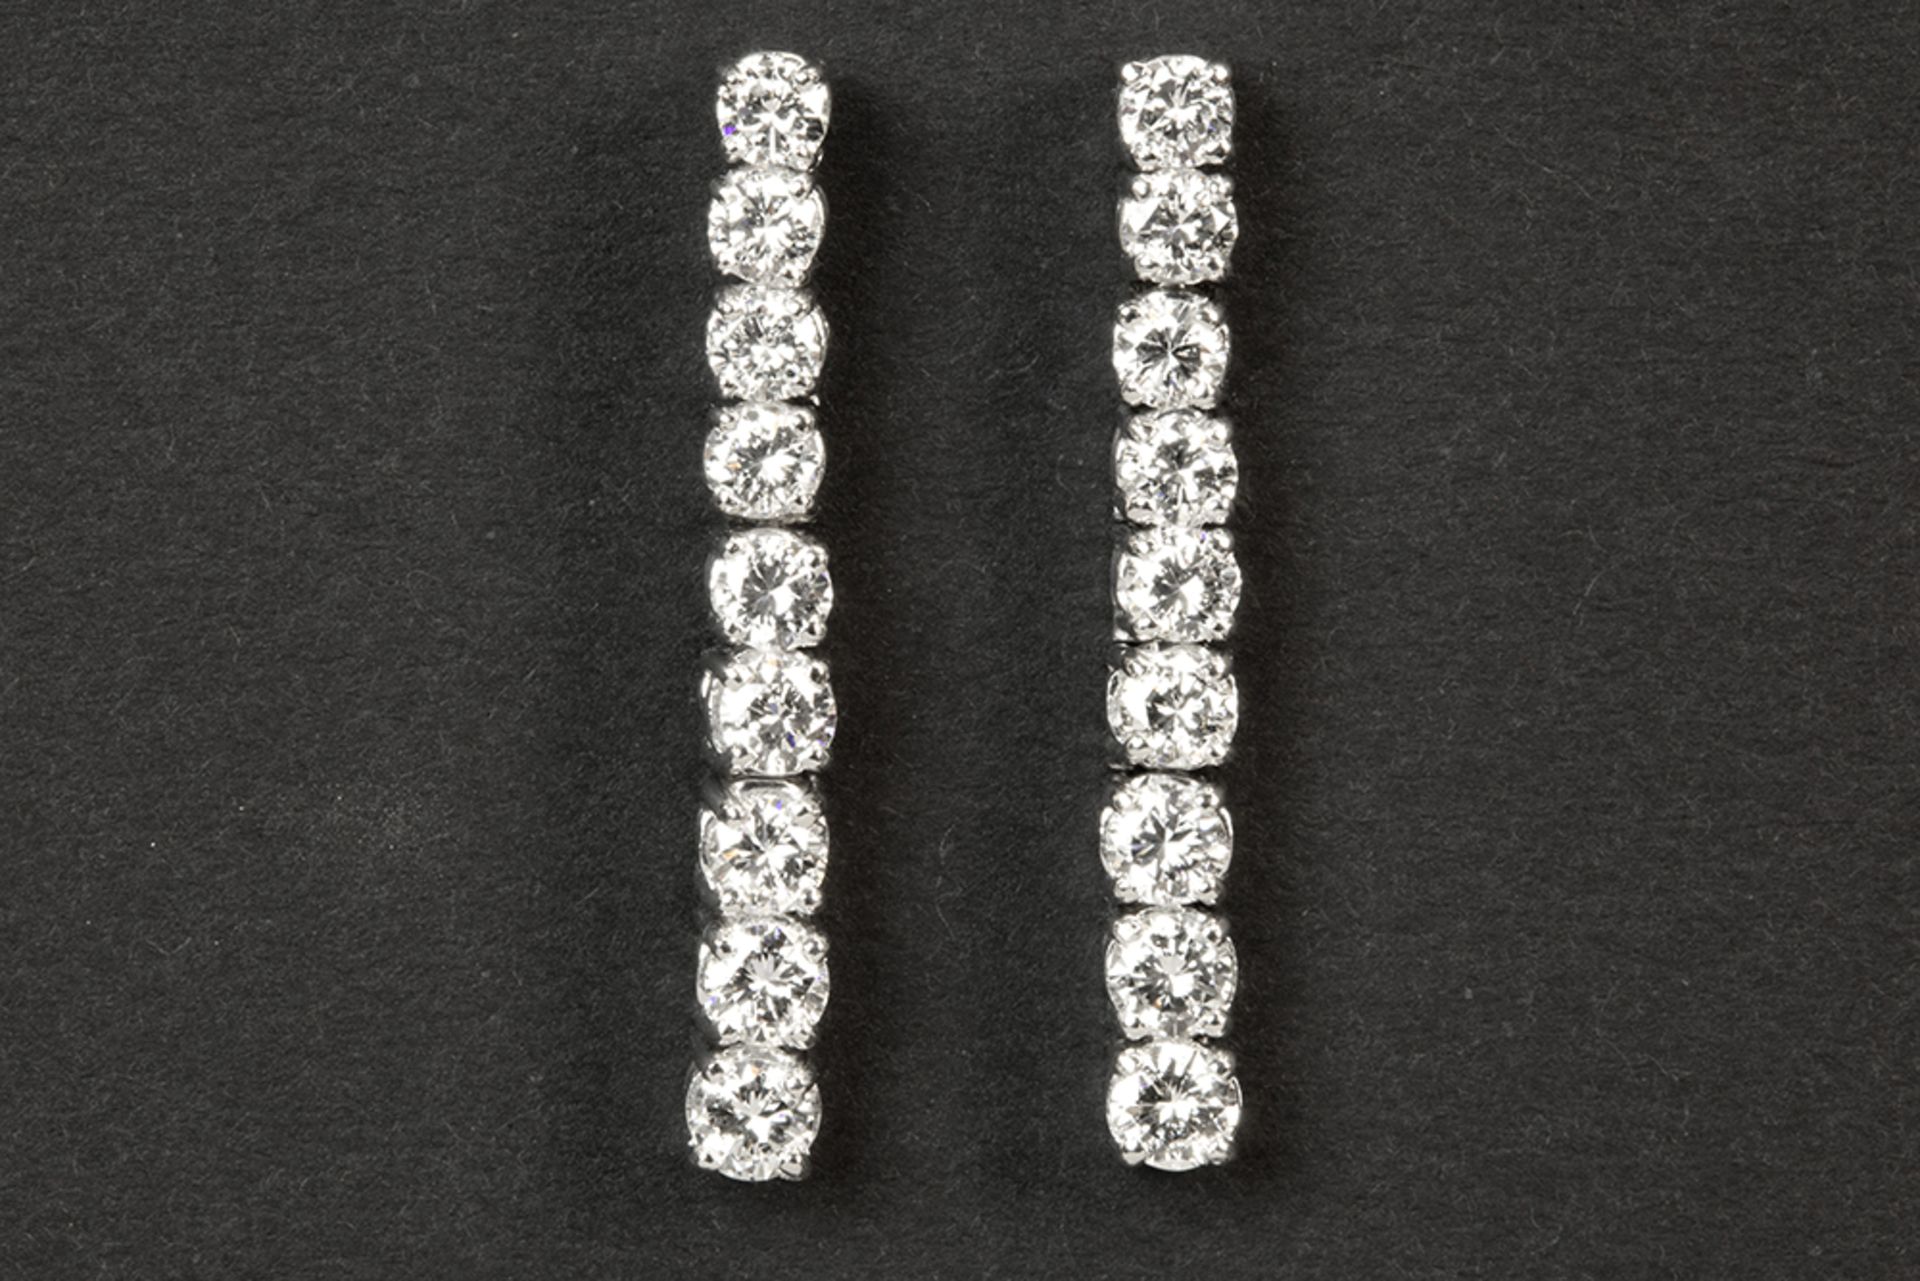 pair of earrings in white gold (18 carat) with at least 2,50 carat of very high quality brilliant